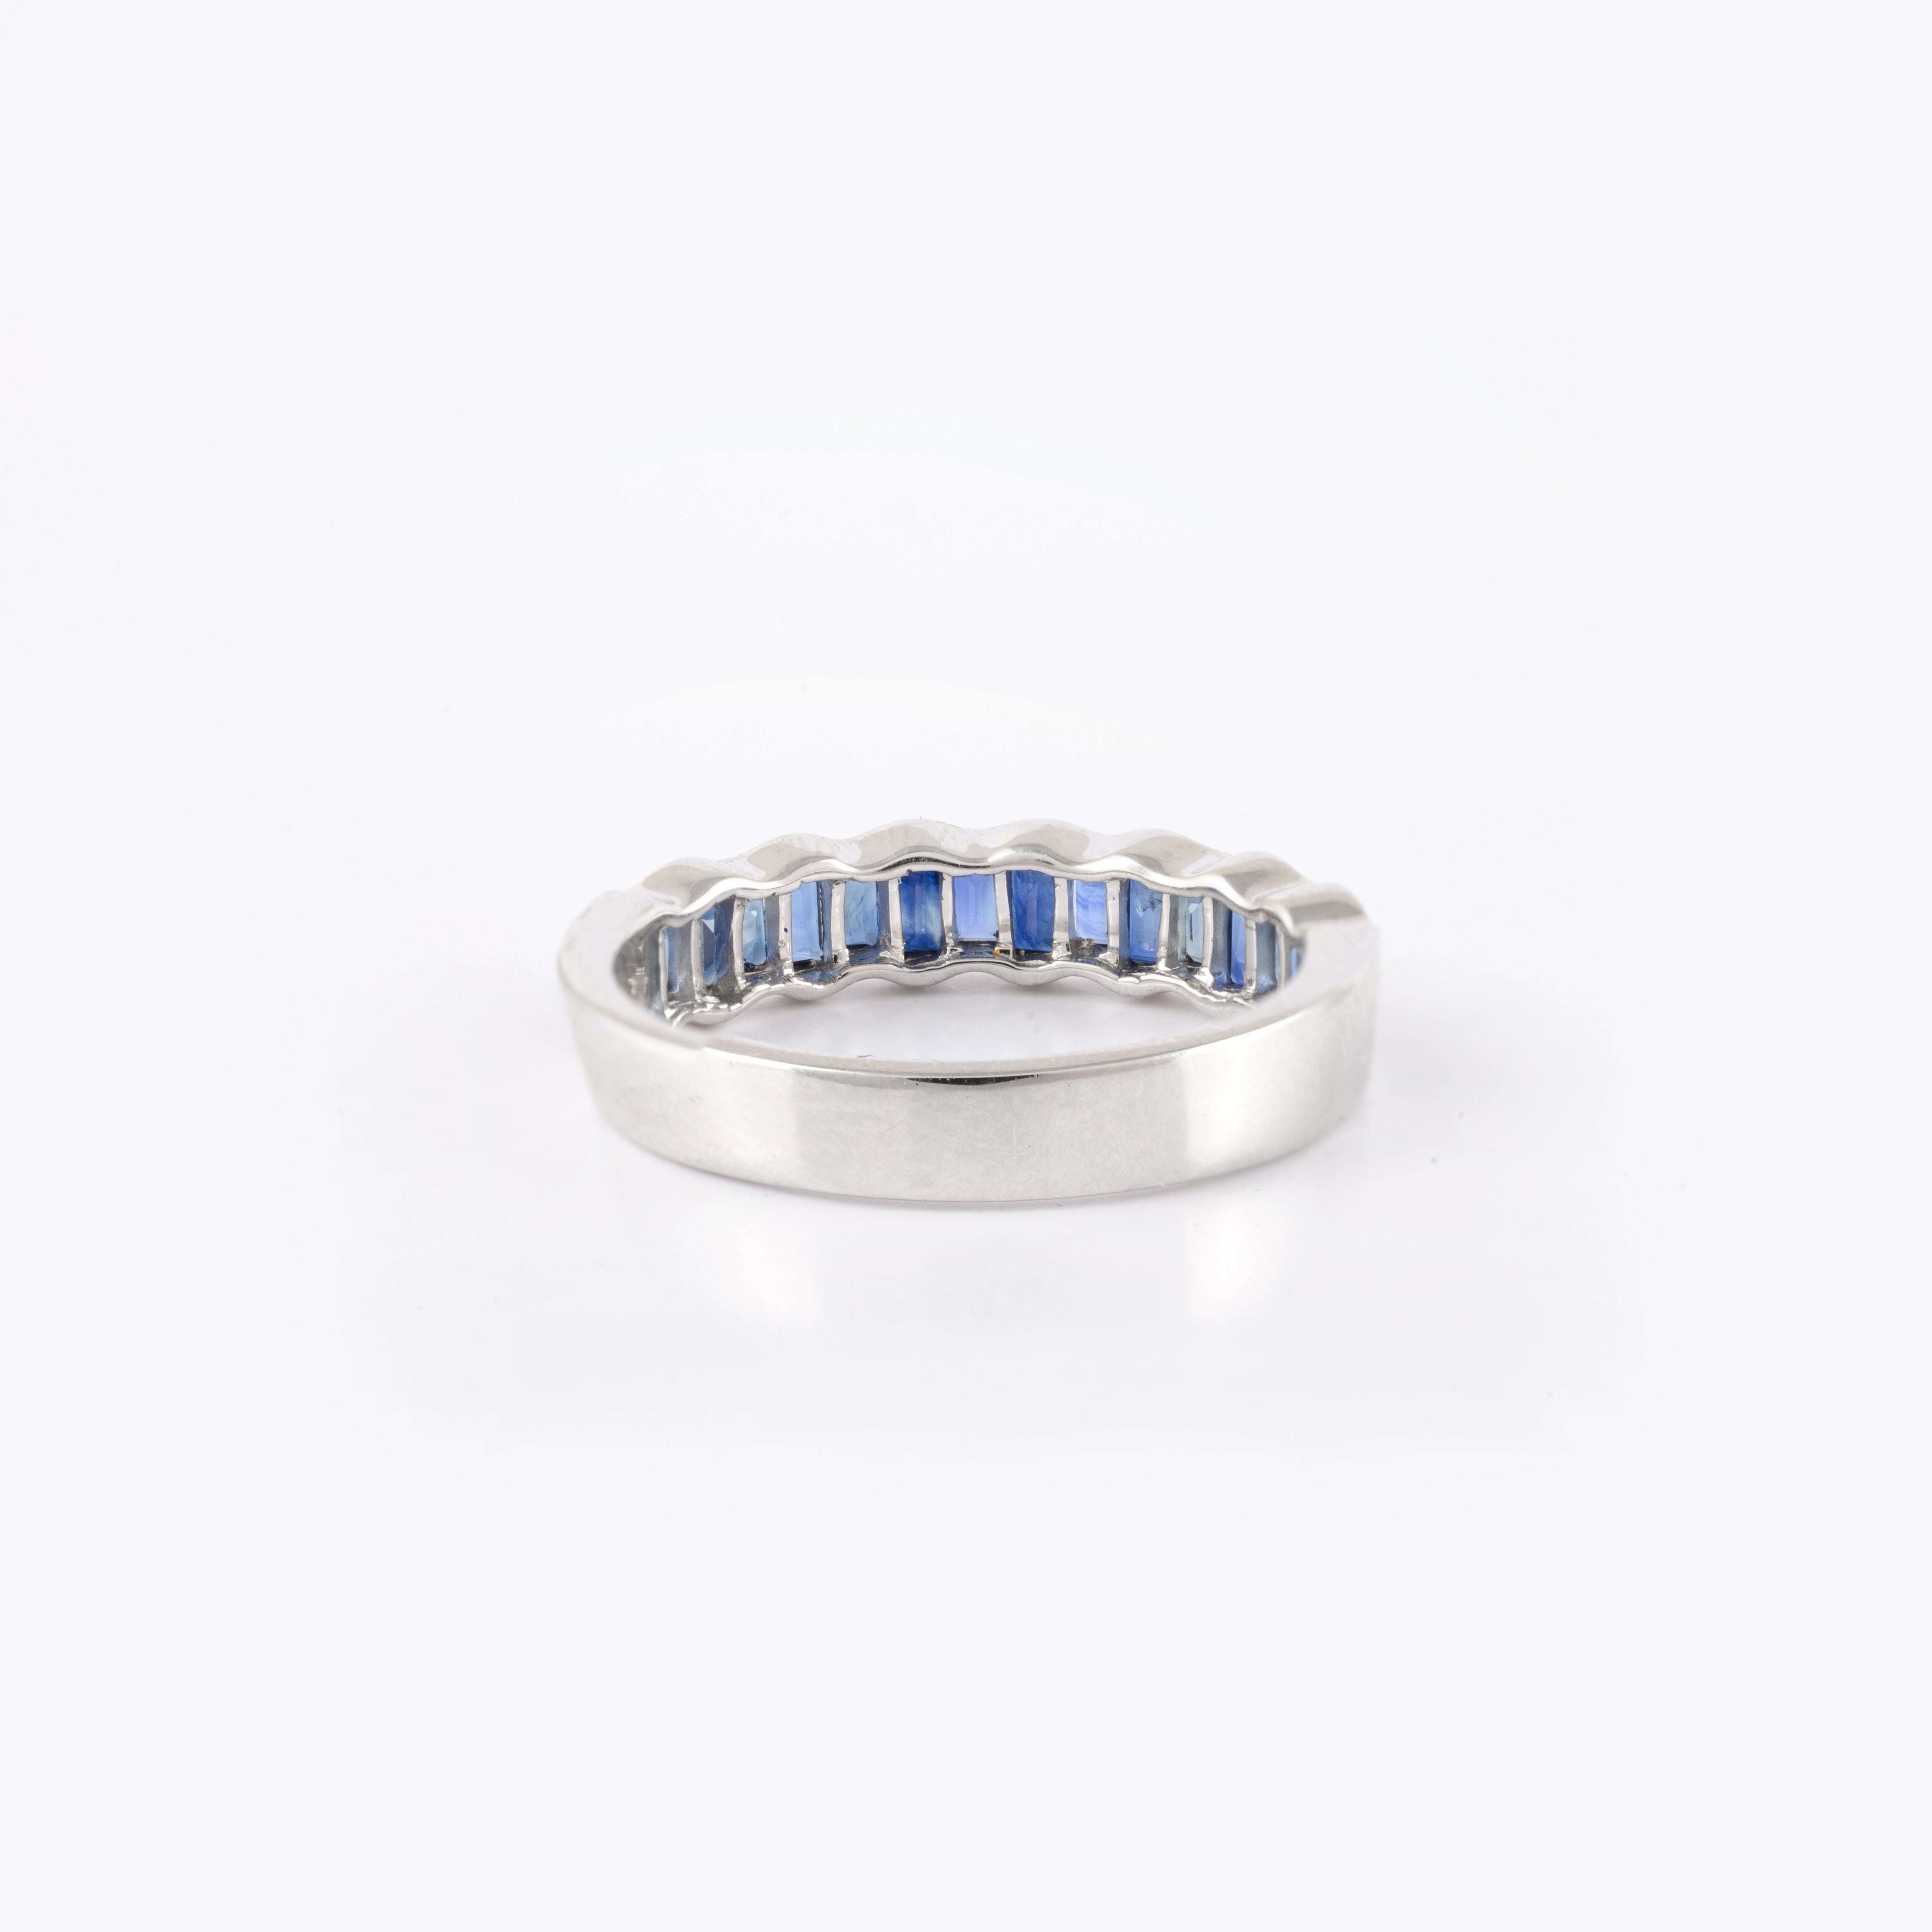 For Sale:  Elegant Stackable Blue Sapphire Gemstone Band Ring in 18k Solid White Gold 6